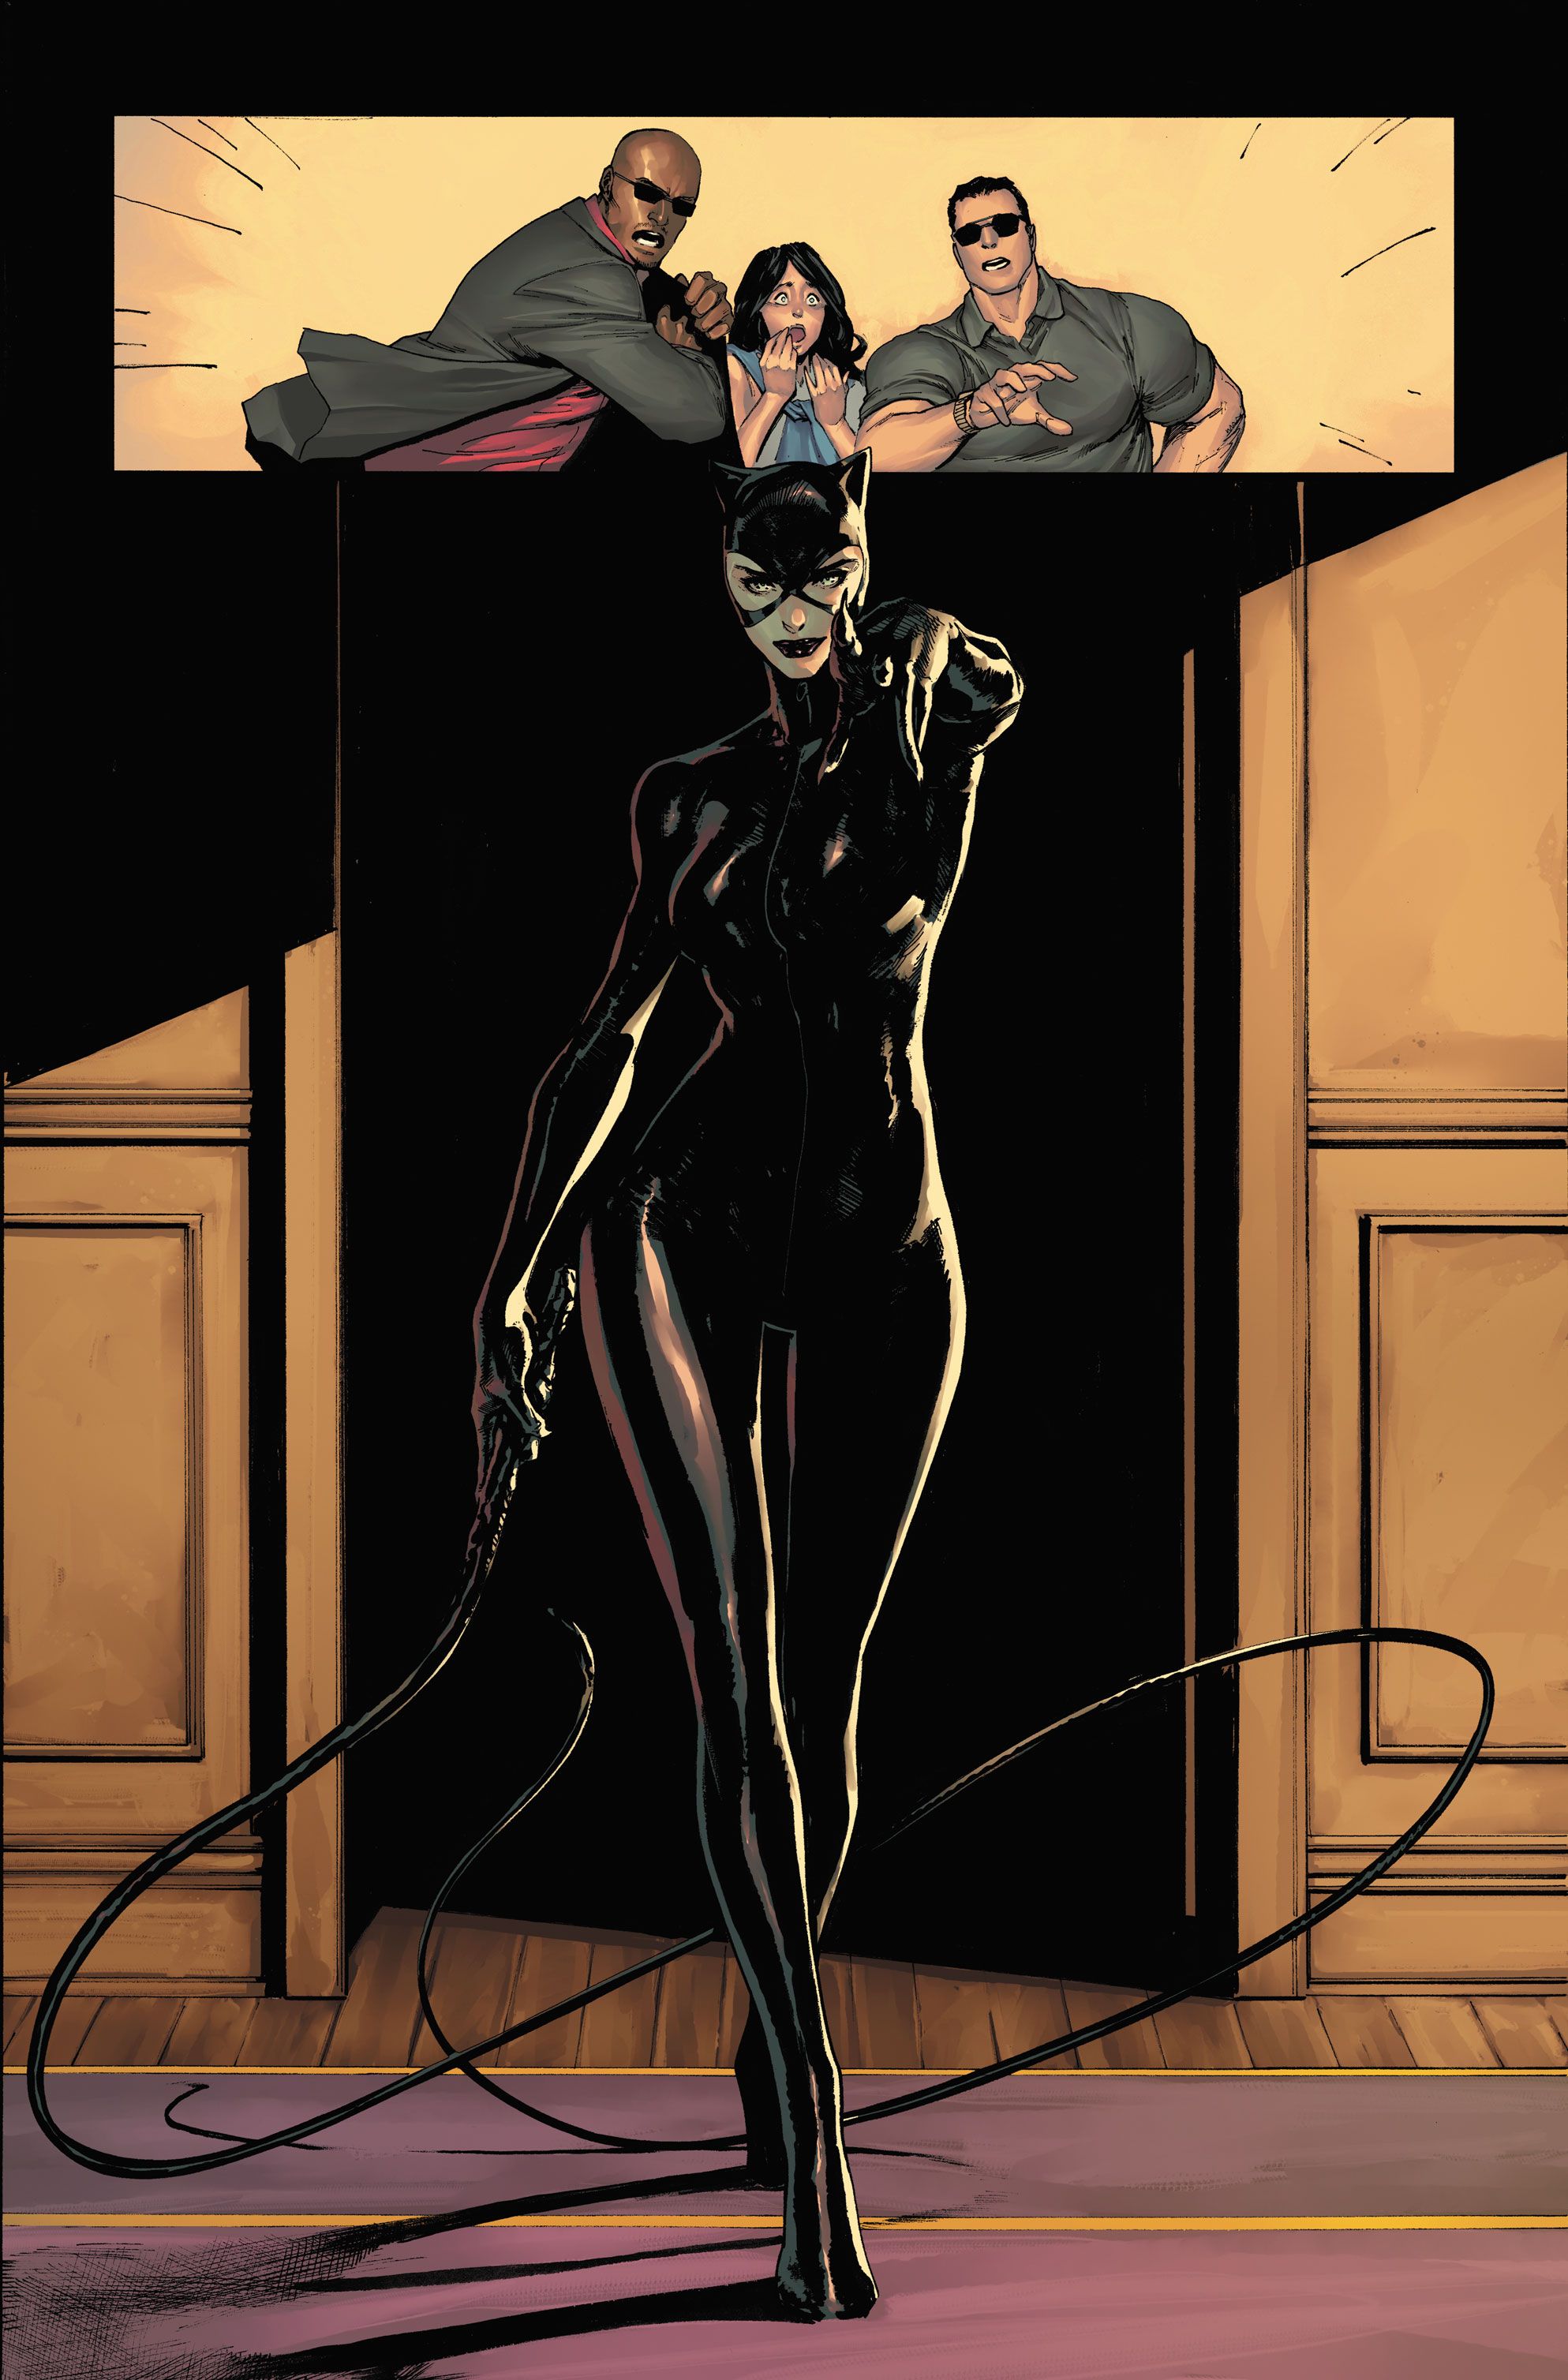 Page from Batman: Killing Time #1 by Tom King, David Marquez and Alejandro Sanchez.